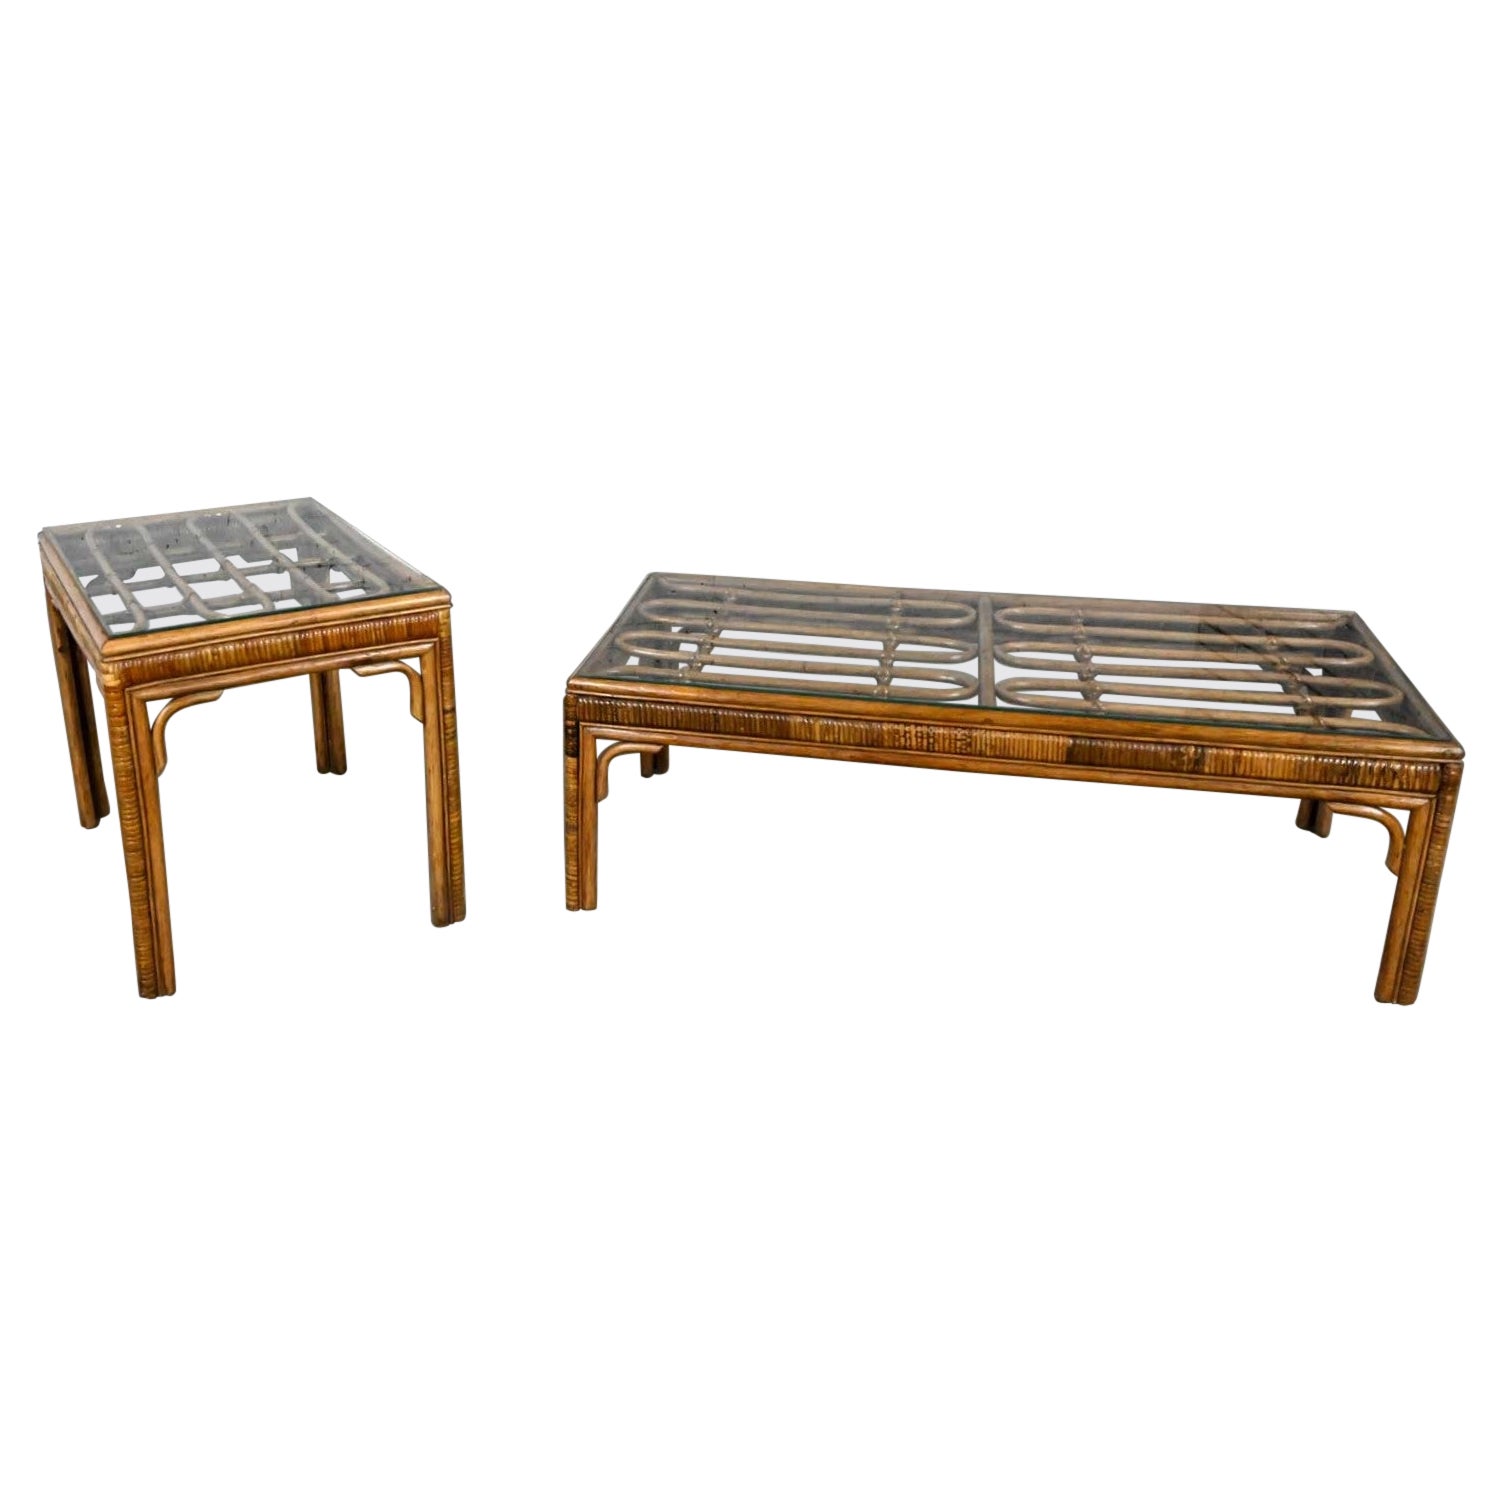 Vintage Organic Modern Rattan Coffee Table & Side Table Style Ficks Reed, Pair For Sale